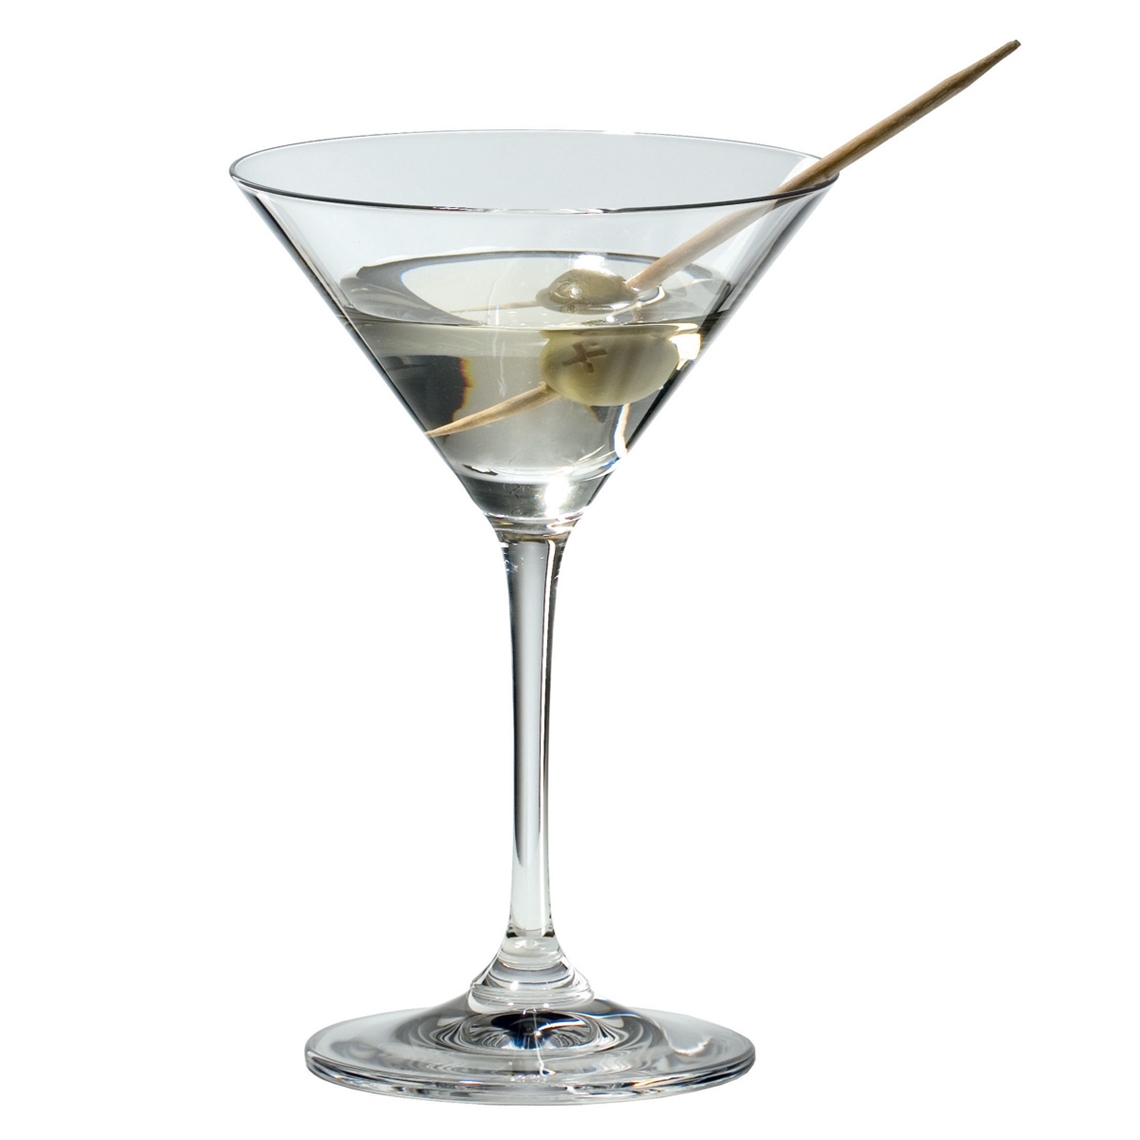 View more brandy / cognac glasses from our Martini Glasses range